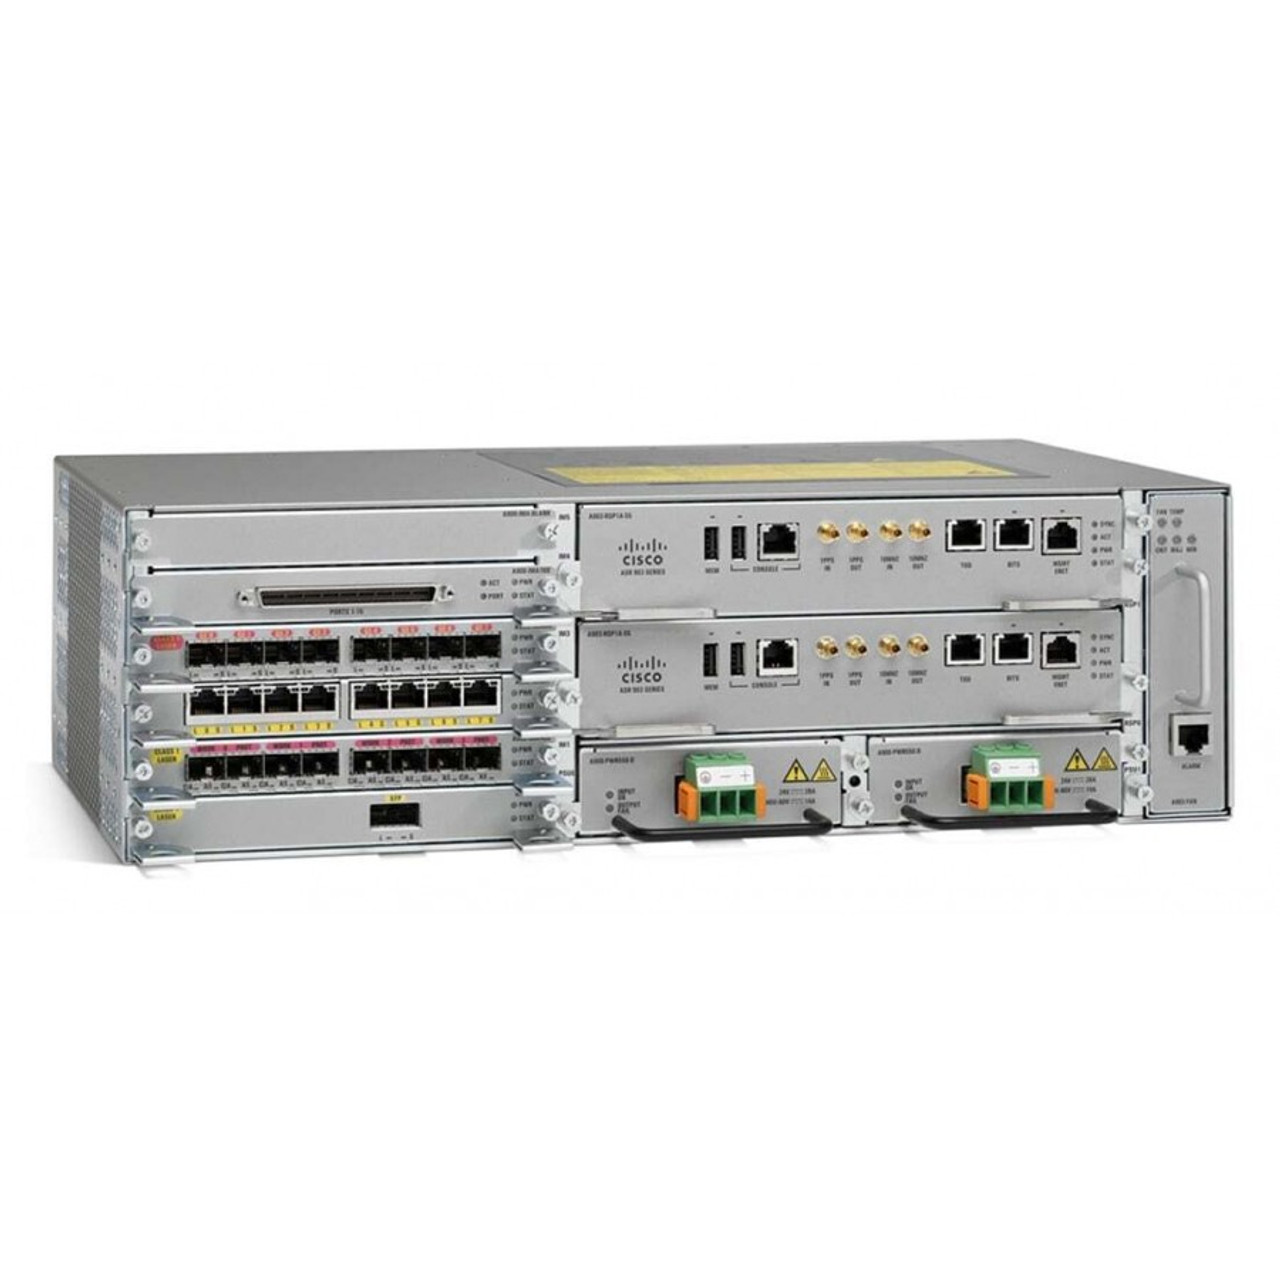 ASR-9910 | Cisco | ASR 9910 Router Chassis